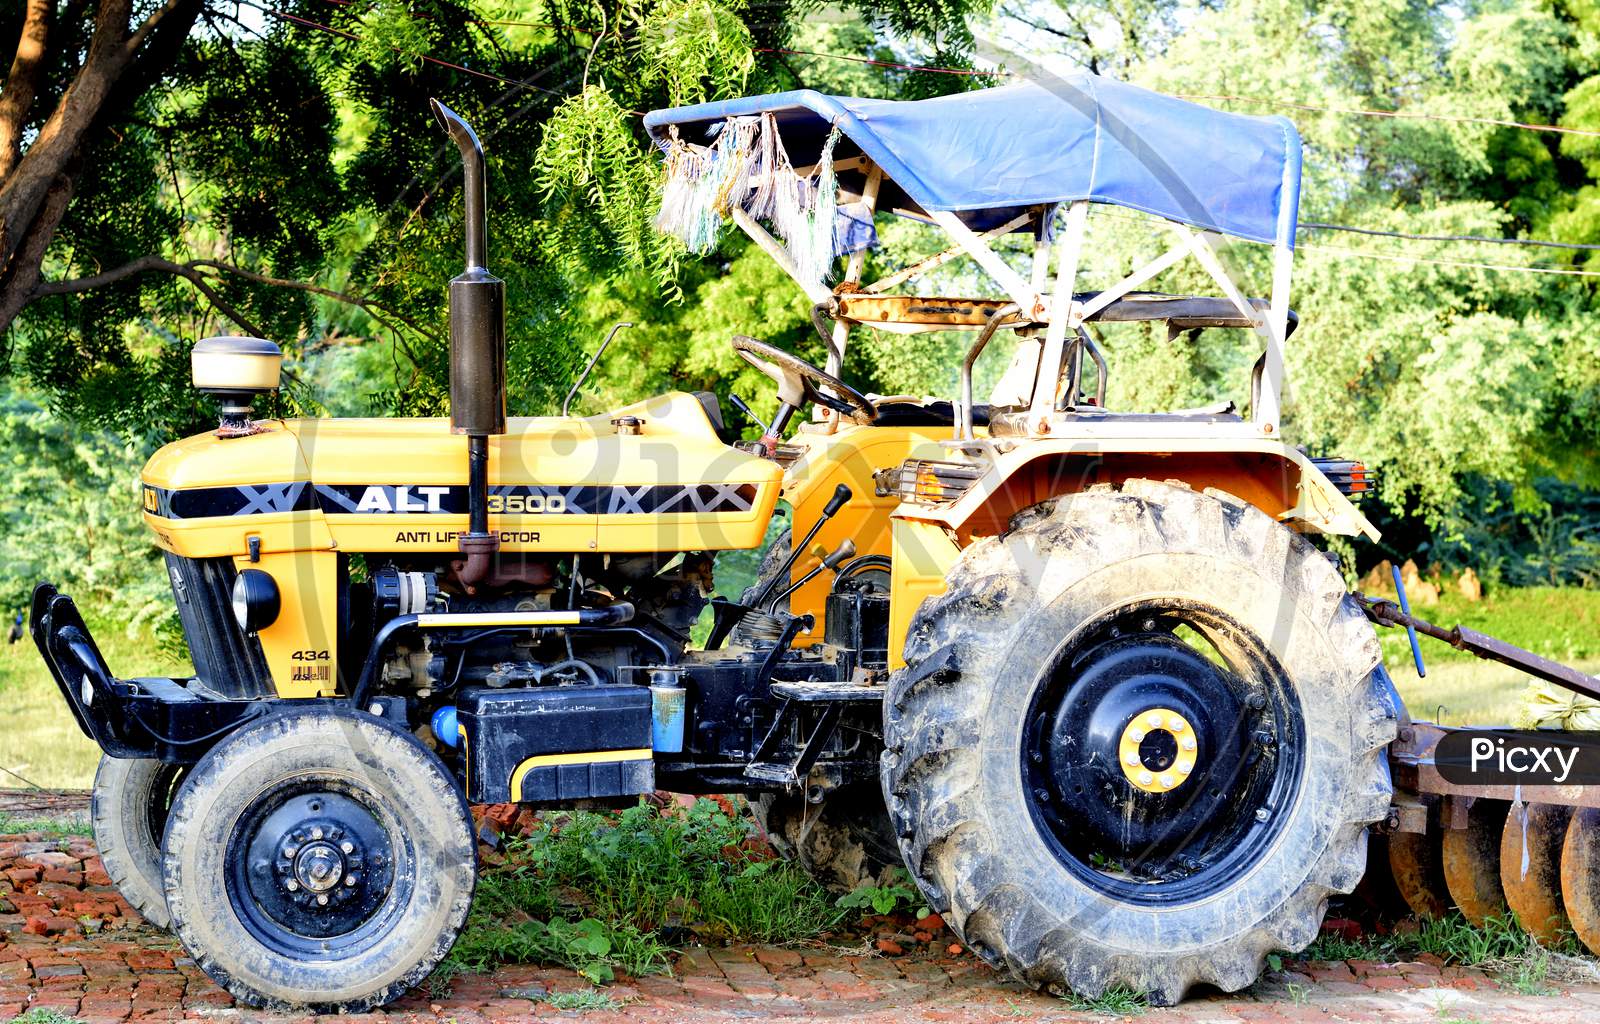 A Yellow Color Alt Anti Lift Tractor Manufactured By Escorts India